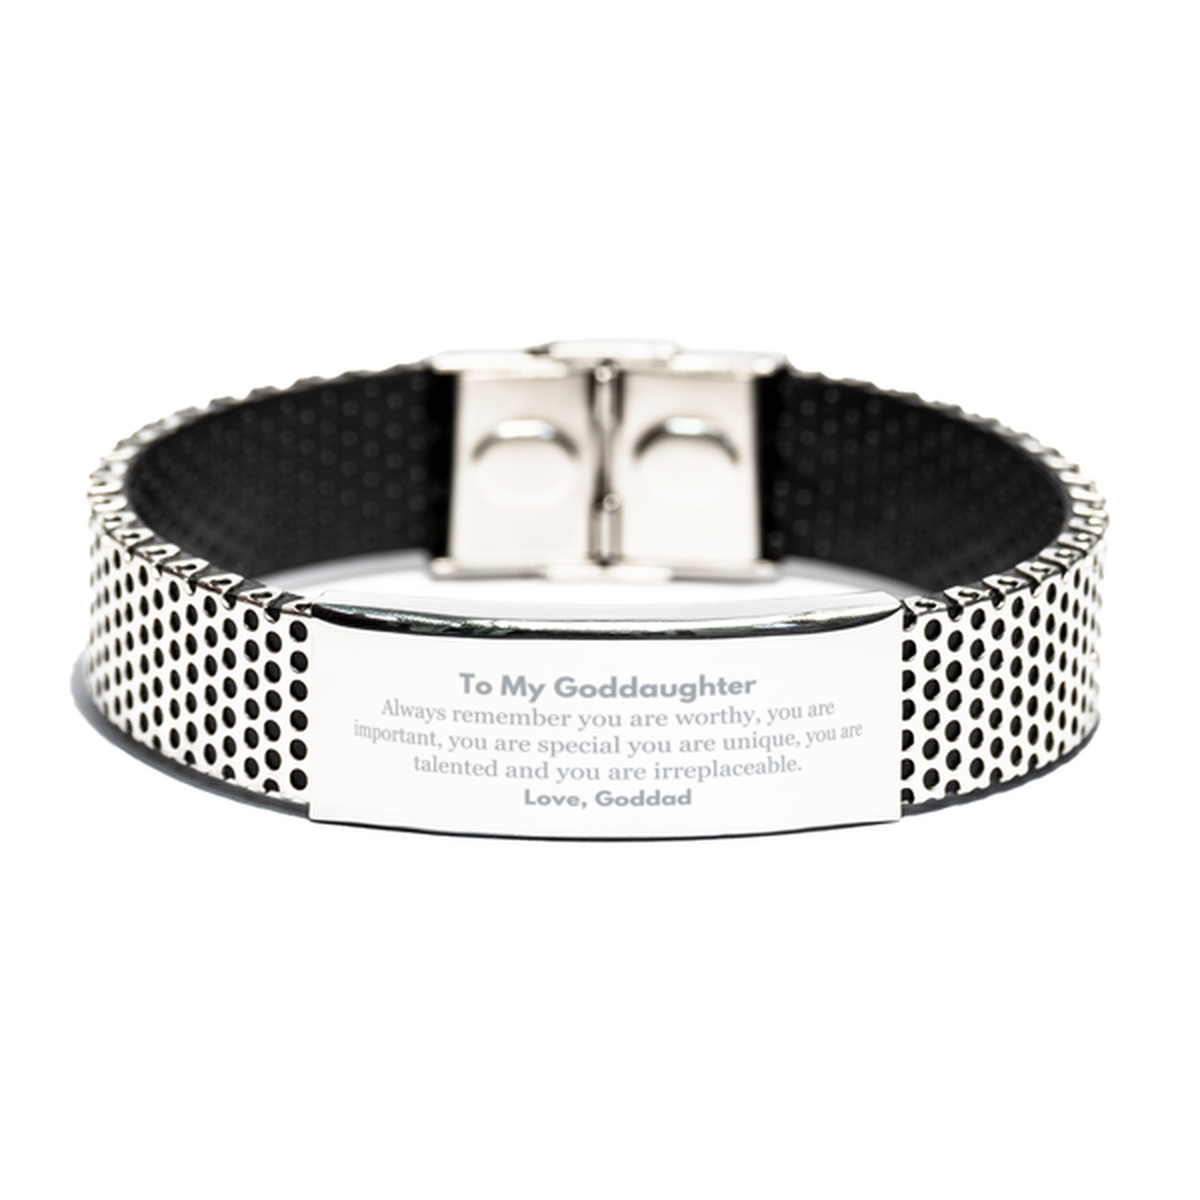 Goddaughter Birthday Gifts from Goddad, Inspirational Stainless Steel Bracelet for Goddaughter Christmas Graduation Gifts for Goddaughter Always remember you are worthy, you are important. Love, Goddad